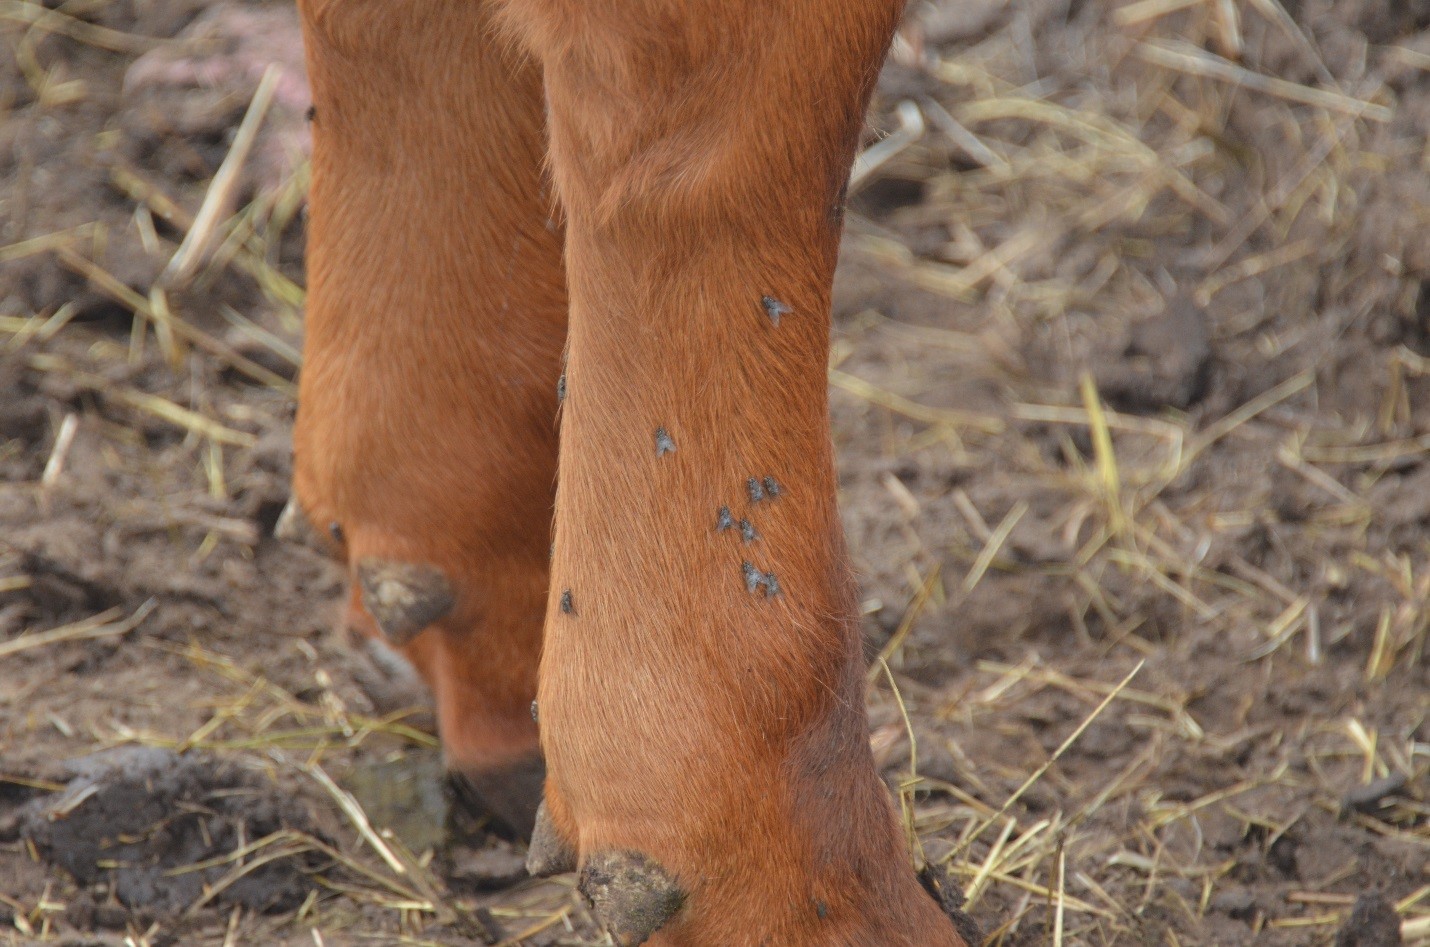 Stable flies taking a blood meal on front legs of a pastured animal. Photo courtesy of Dave Boxler.